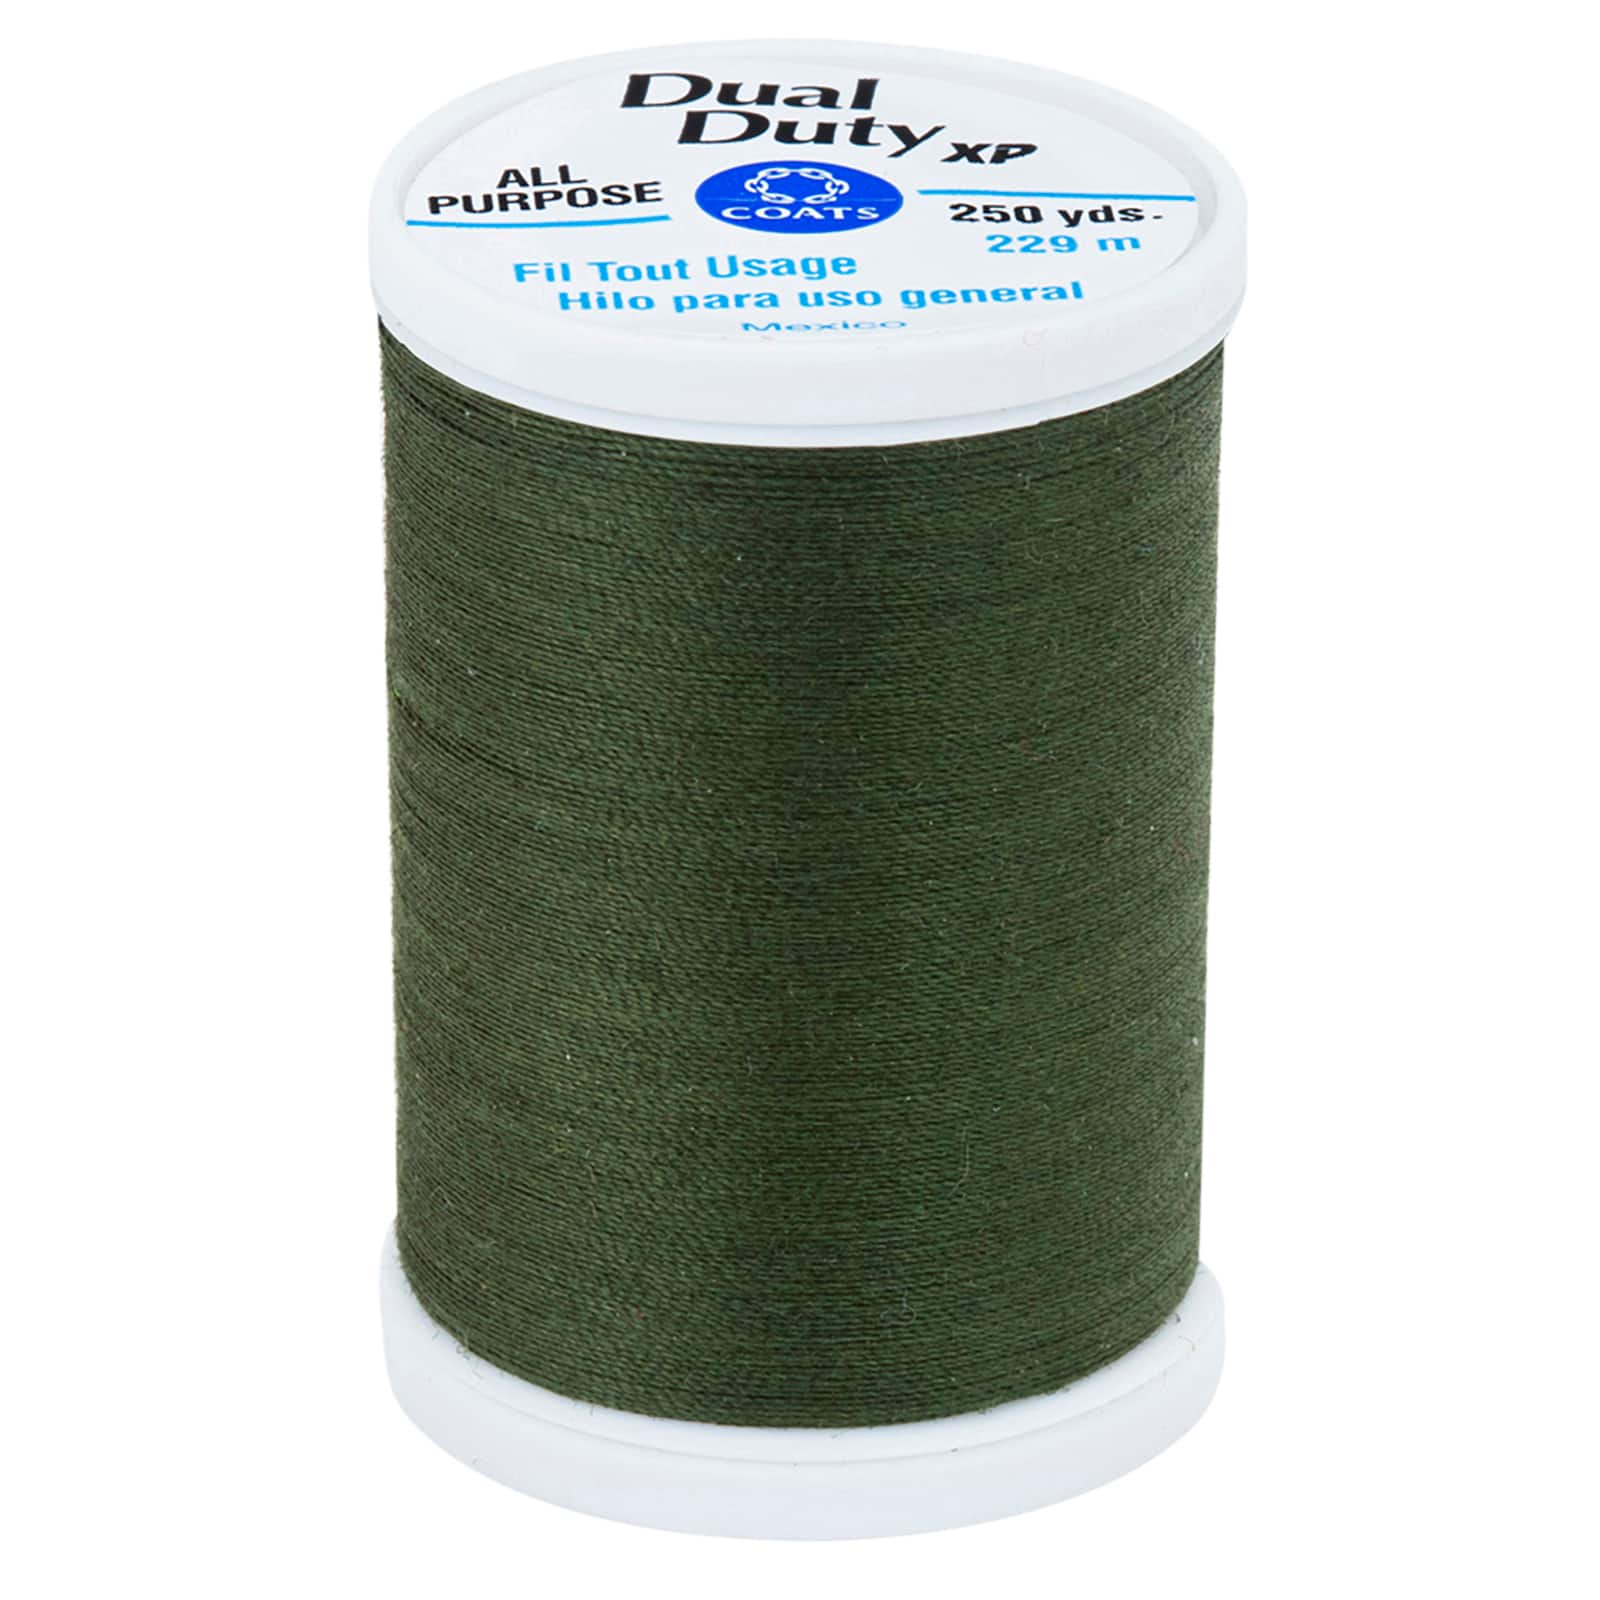 Coats Cotton Covered Quilting & Piecing Thread 250yd-Summer Brown